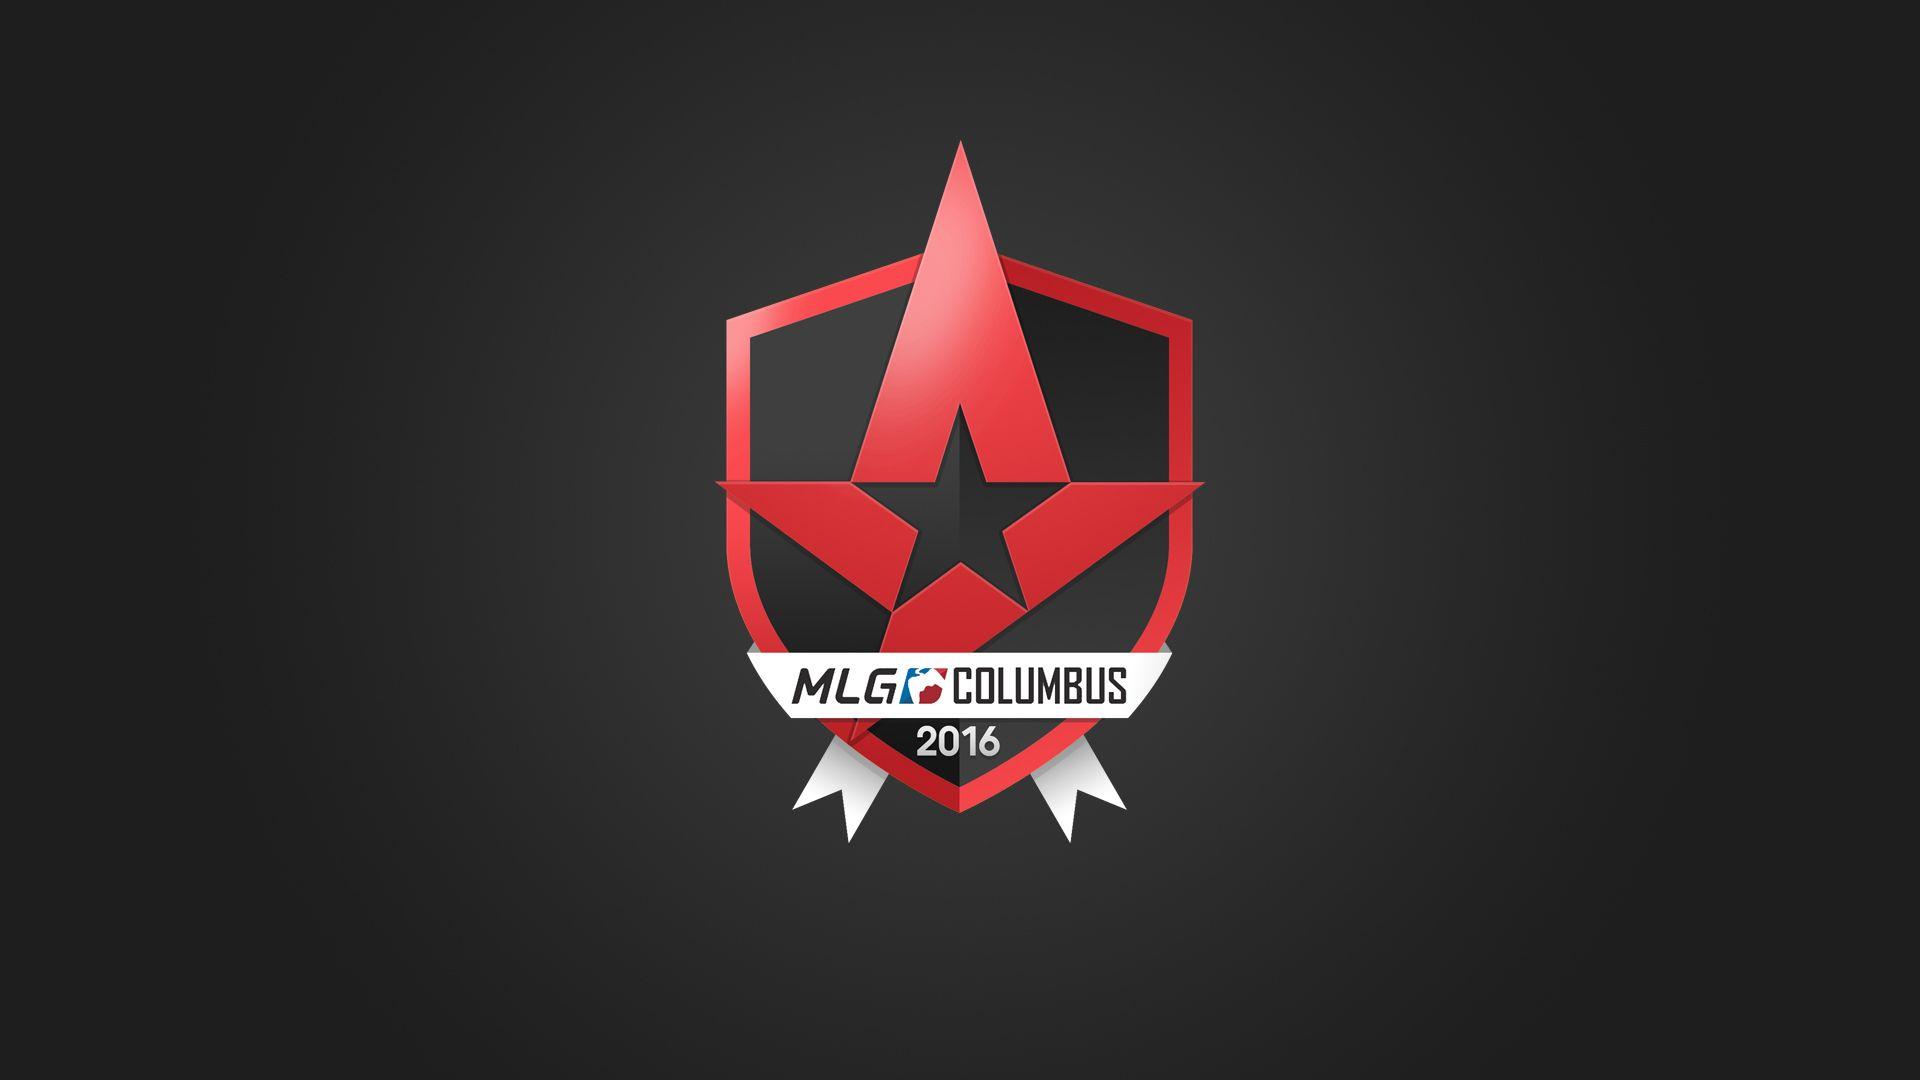 unofficial MLG Stickers you wanted as wallpaper Links in comments